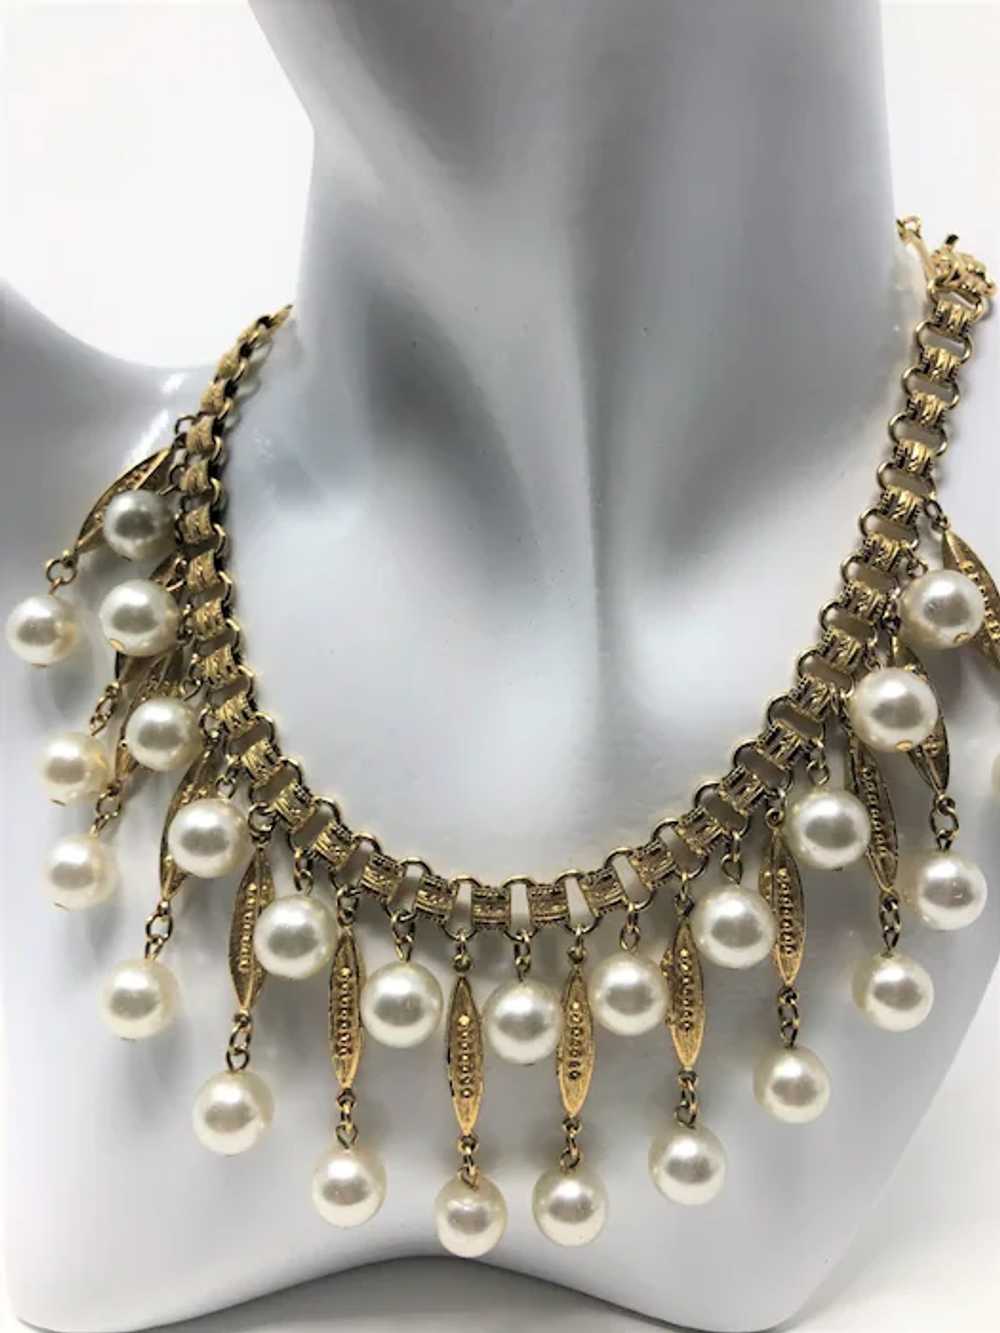 Beautiful Coro 60's Faux Pearl Necklace - image 2